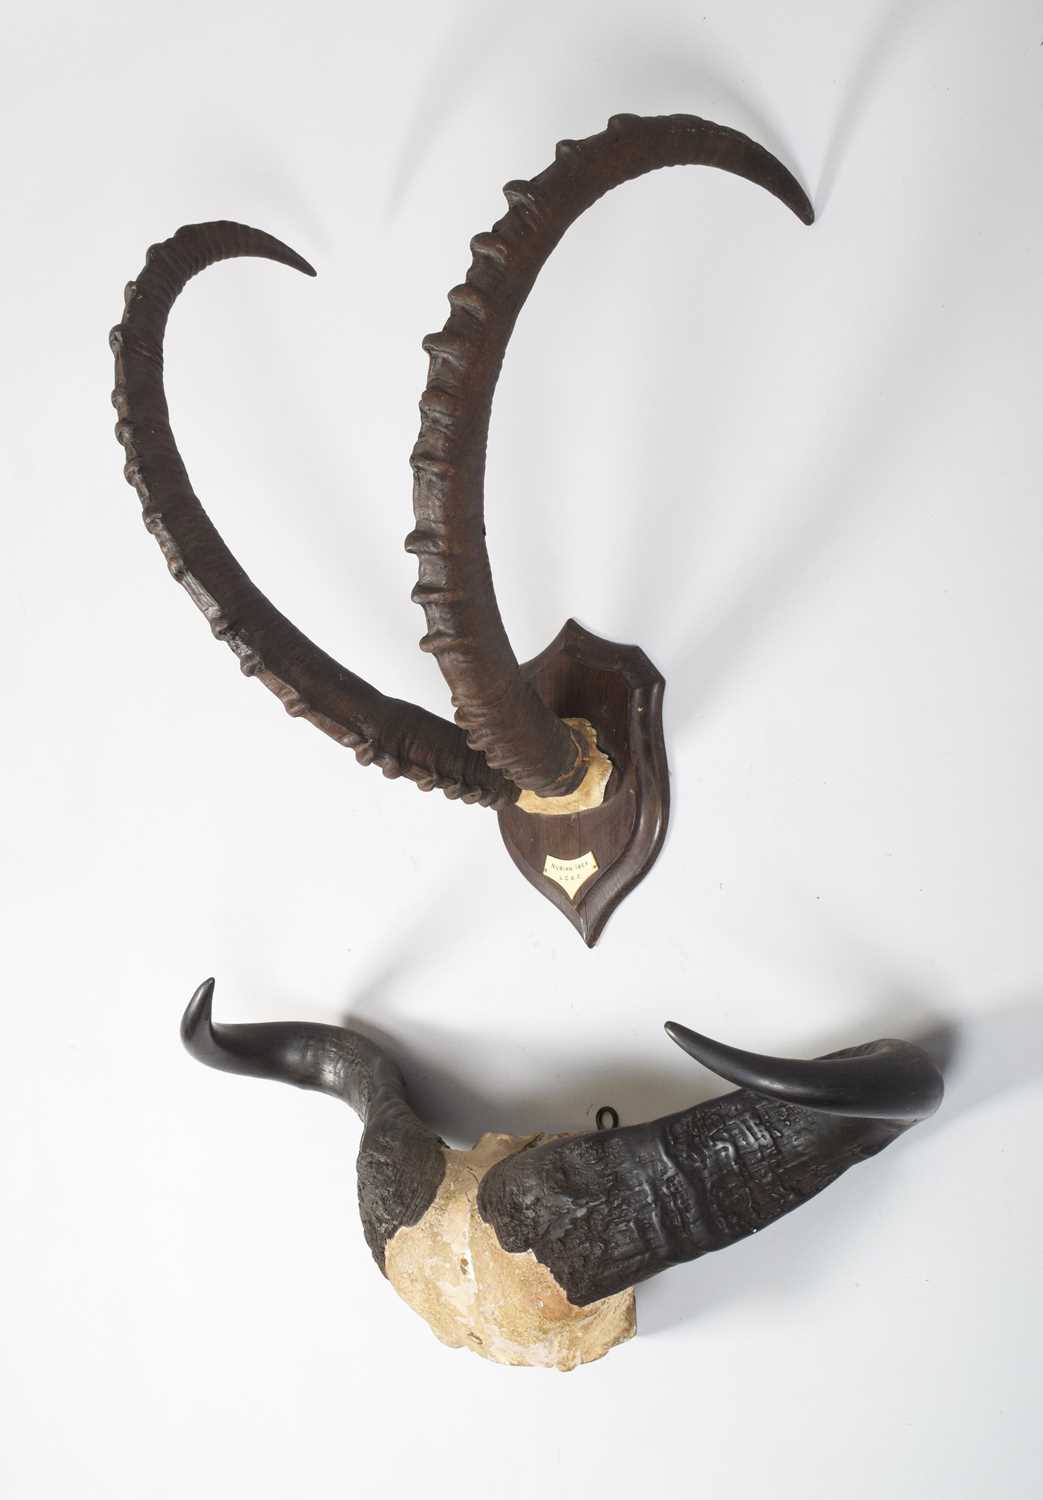 Antlers/Horns: A Set of Nubian Ibex Horns and Cape Buffalo Horns, circa 1900-1914, by Rowland Ward - Image 3 of 5